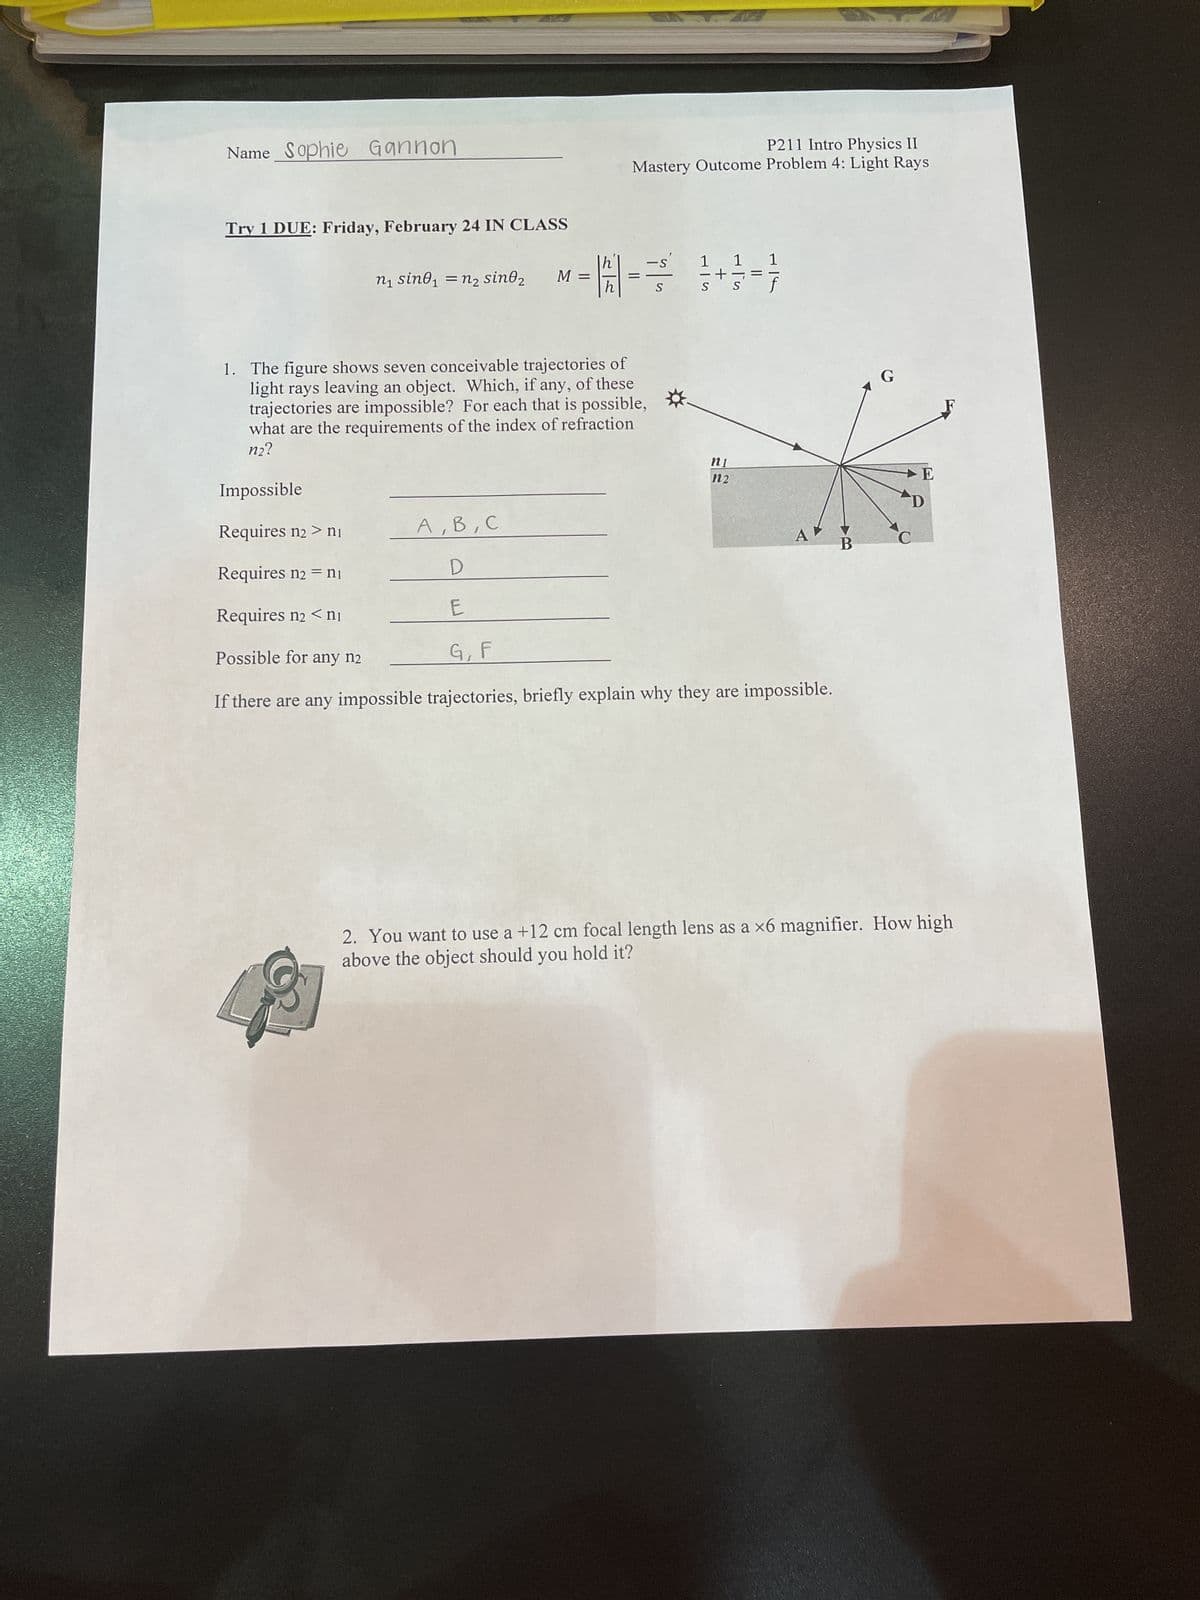 Name Sophie Gannon
Try 1 DUE: Friday, February 24 IN CLASS
n₁ sine₁ = n₂ sino₂
M =
H
P211 Intro Physics II
Mastery Outcome Problem 4: Light Rays
=
-s' 1
1. The figure shows seven conceivable trajectories of
light rays leaving an object. Which, if any, of these
trajectories are impossible? For each that is possible,
what are the requirements of the index of refraction
n2?
Impossible
Requires n2 > ni
A, B, C
Requires n2 = n₁
D
Requires n2 < nj
E
Possible for any n2
G, F
If there are any impossible trajectories, briefly explain why they are impossible.
n1
1 1
i-F
n2
A
B
E
D
2. You want to use a +12 cm focal length lens as a x6 magnifier. How high
above the object should you hold it?